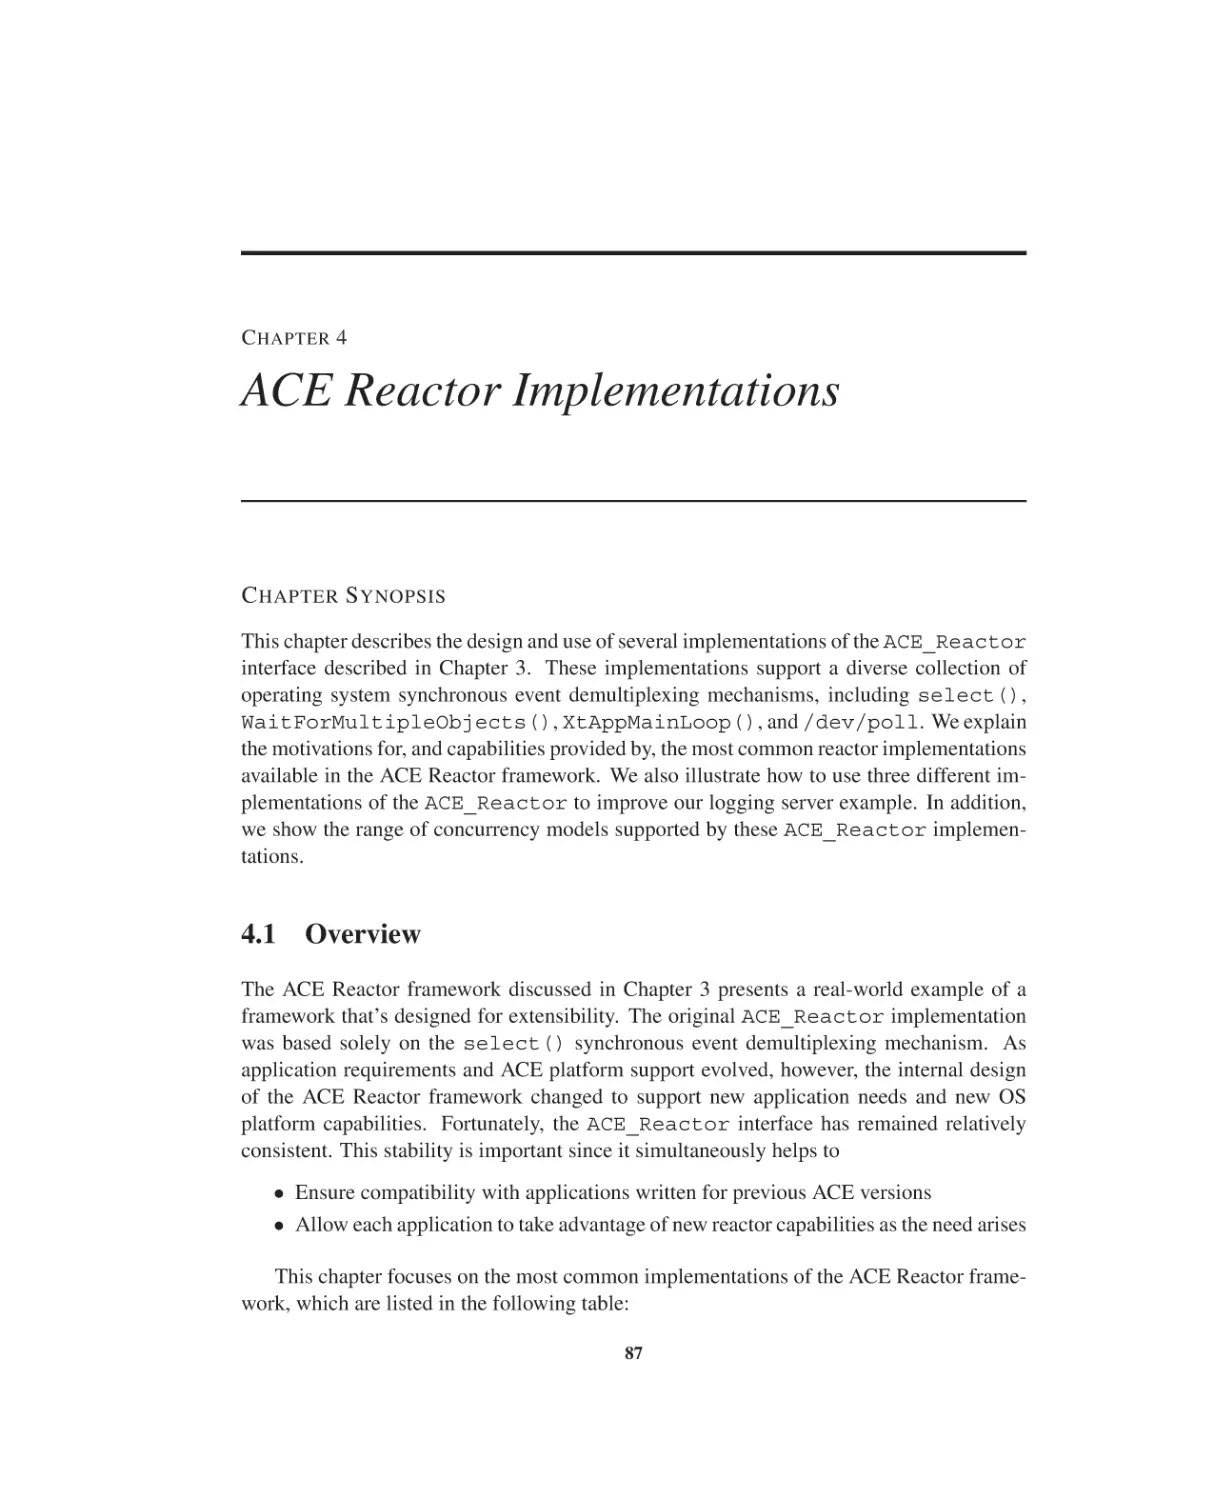 Chapter 4 ACE Reactor Implementations
4.1 Overview